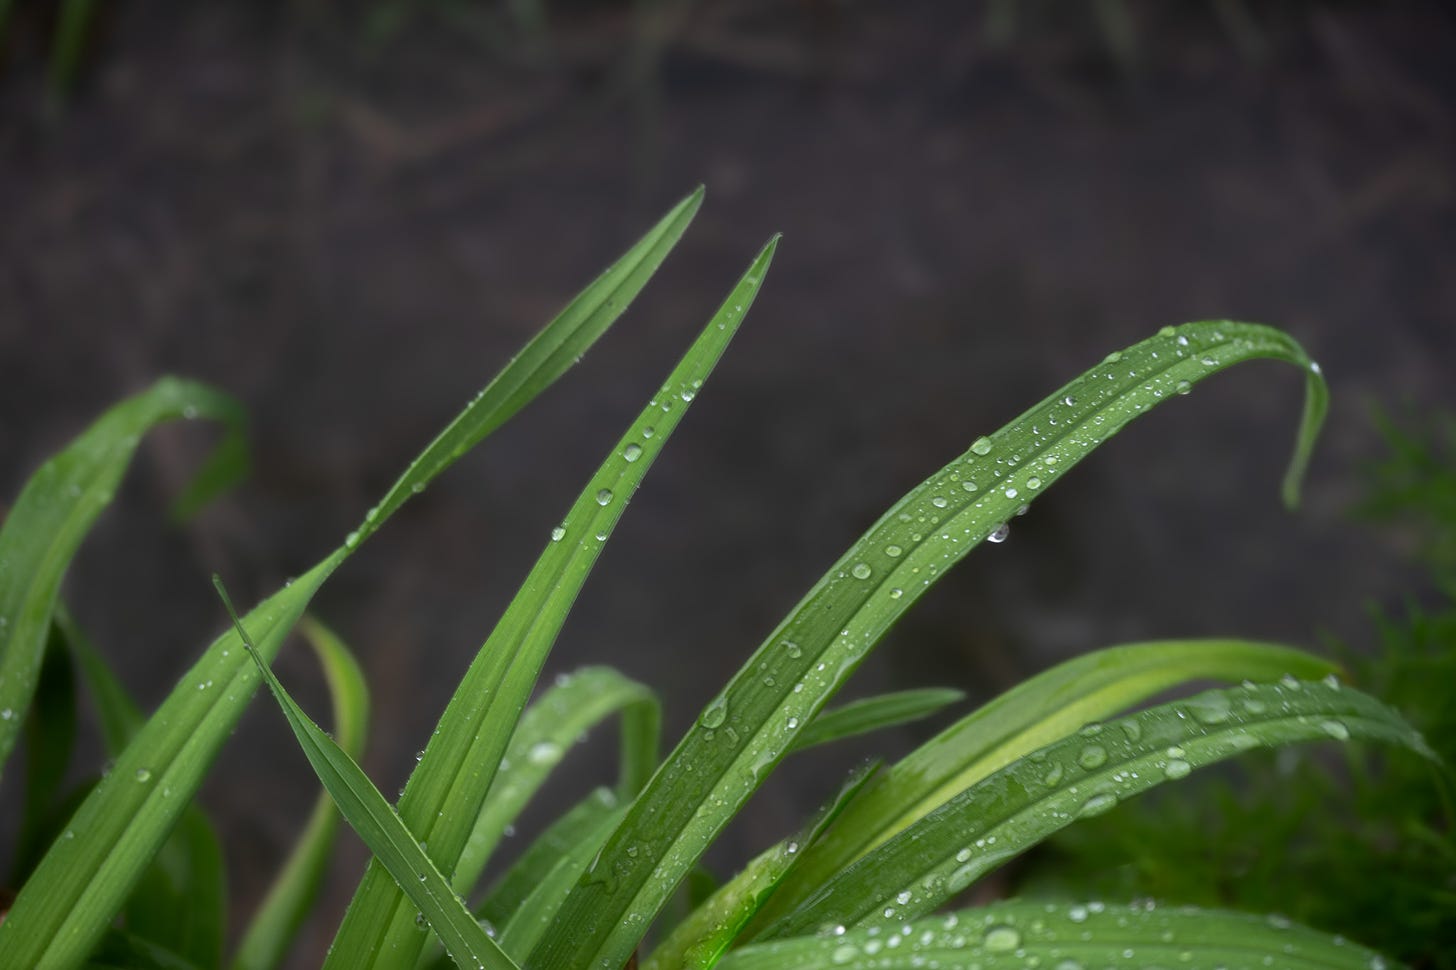 Raindrops clinging to the green fronds of a day lily and a darkened background